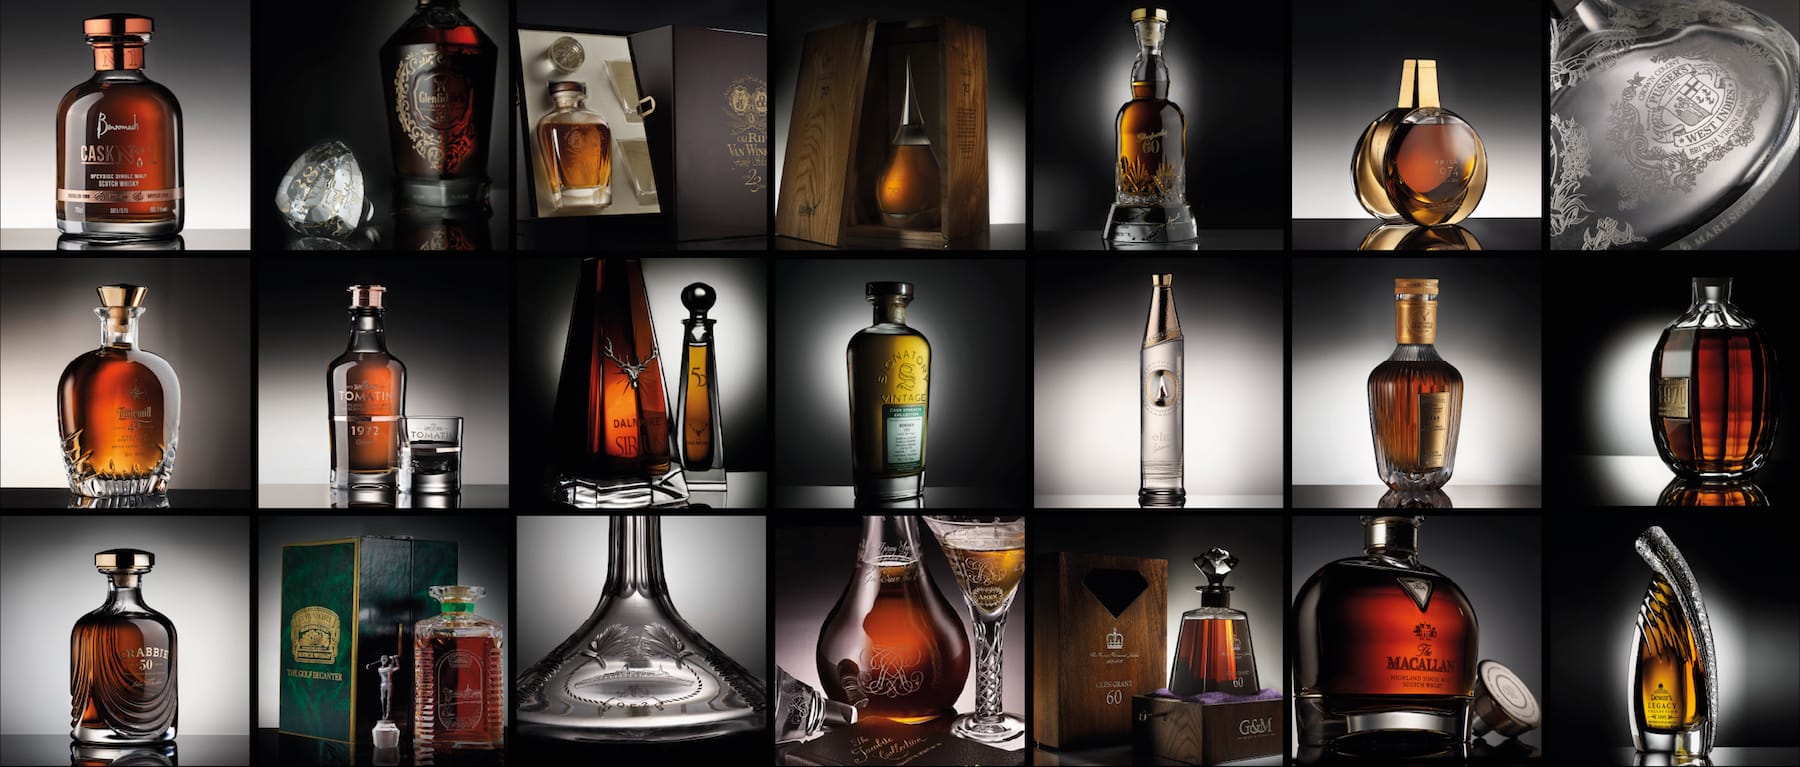 40 years of beautiful whisky decanters from Glencairn Crystal